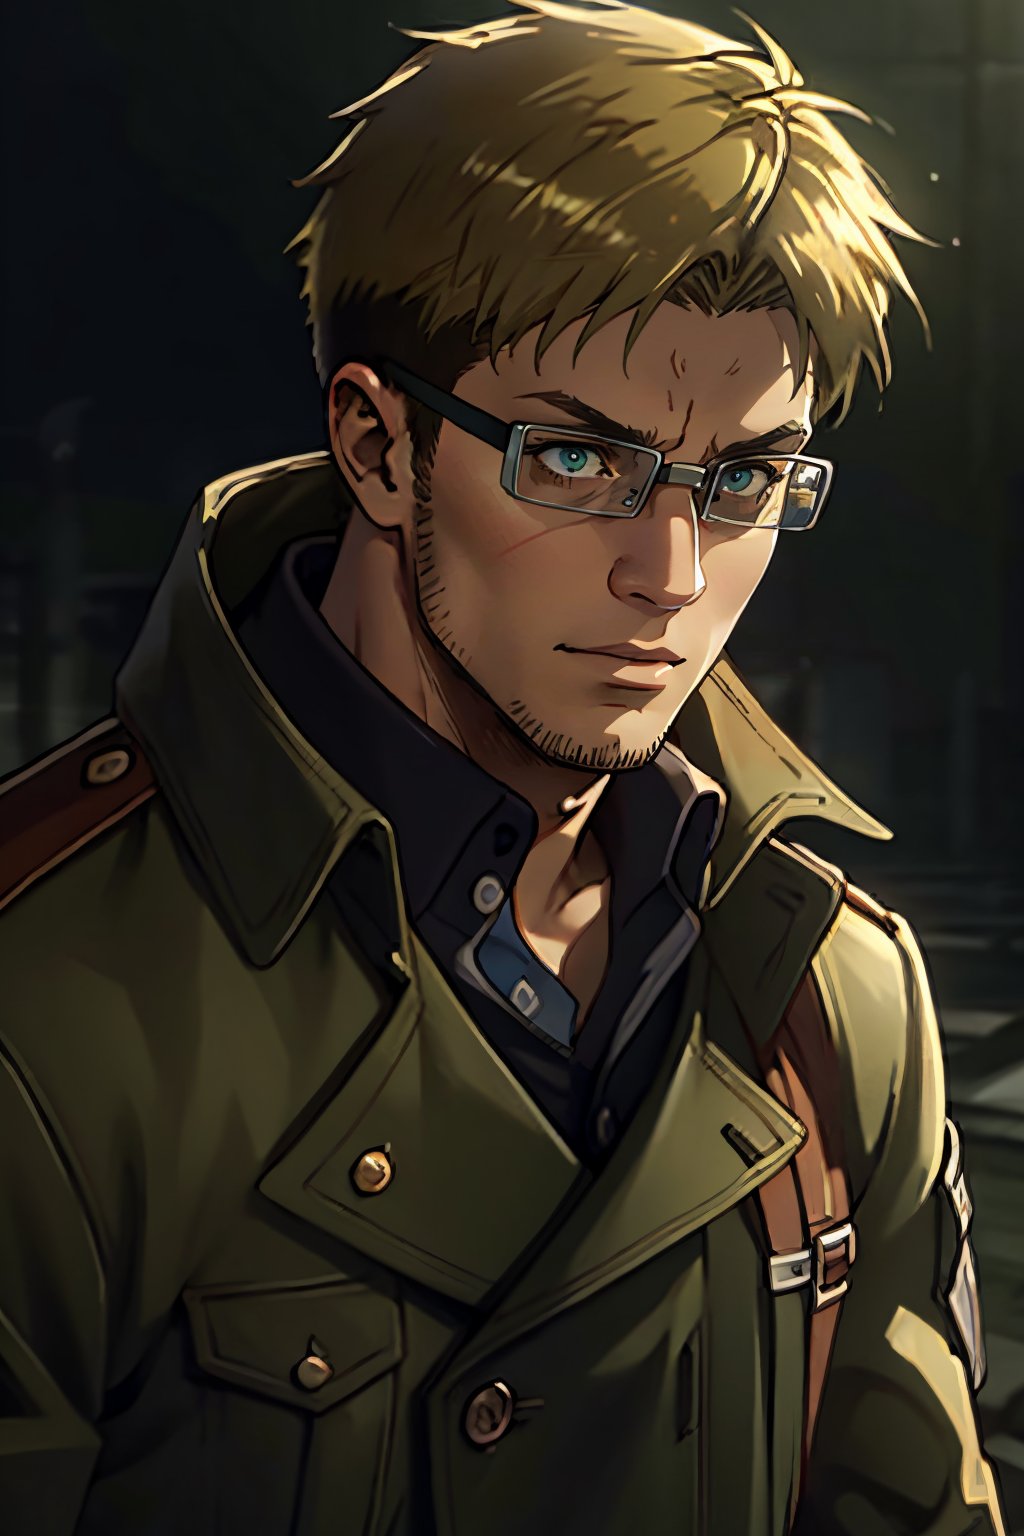 Abel, Attack on Titan, Shingeki no Kyojin, Scout Regiment, uniform of the Scout Regiment, green cloak, goggles, thick-rimmed glasses with bands around head, 1boy, solo, male, man, mature, handsome, manly, blond_hair, short hair, light stubble on chin and cheekbones, intense gaze, gentle expression, soft expression, masculine, handsome, charming, alluring, rugged, black trench coat, black pants, grey vest, dark red cravat, (standing), (upper body in frame), simple background, dark atmosphere, perfect light, perfect anatomy, perfect proportions, perfect perspective, 8k, HQ, (best quality:1.5, hyperrealistic:1.5, photorealistic:1.4, madly detailed CG unity 8k wallpaper:1.5, masterpiece:1.3, madly detailed photo:1.2), (hyper-realistic lifelike texture:1.4, realistic eyes:1.2), picture-perfect face, perfect eye pupil, detailed eyes, realistic, HD, UHD, (front view:1.2), portrait, looking outside frame,perfecteyes,(MkmCut)